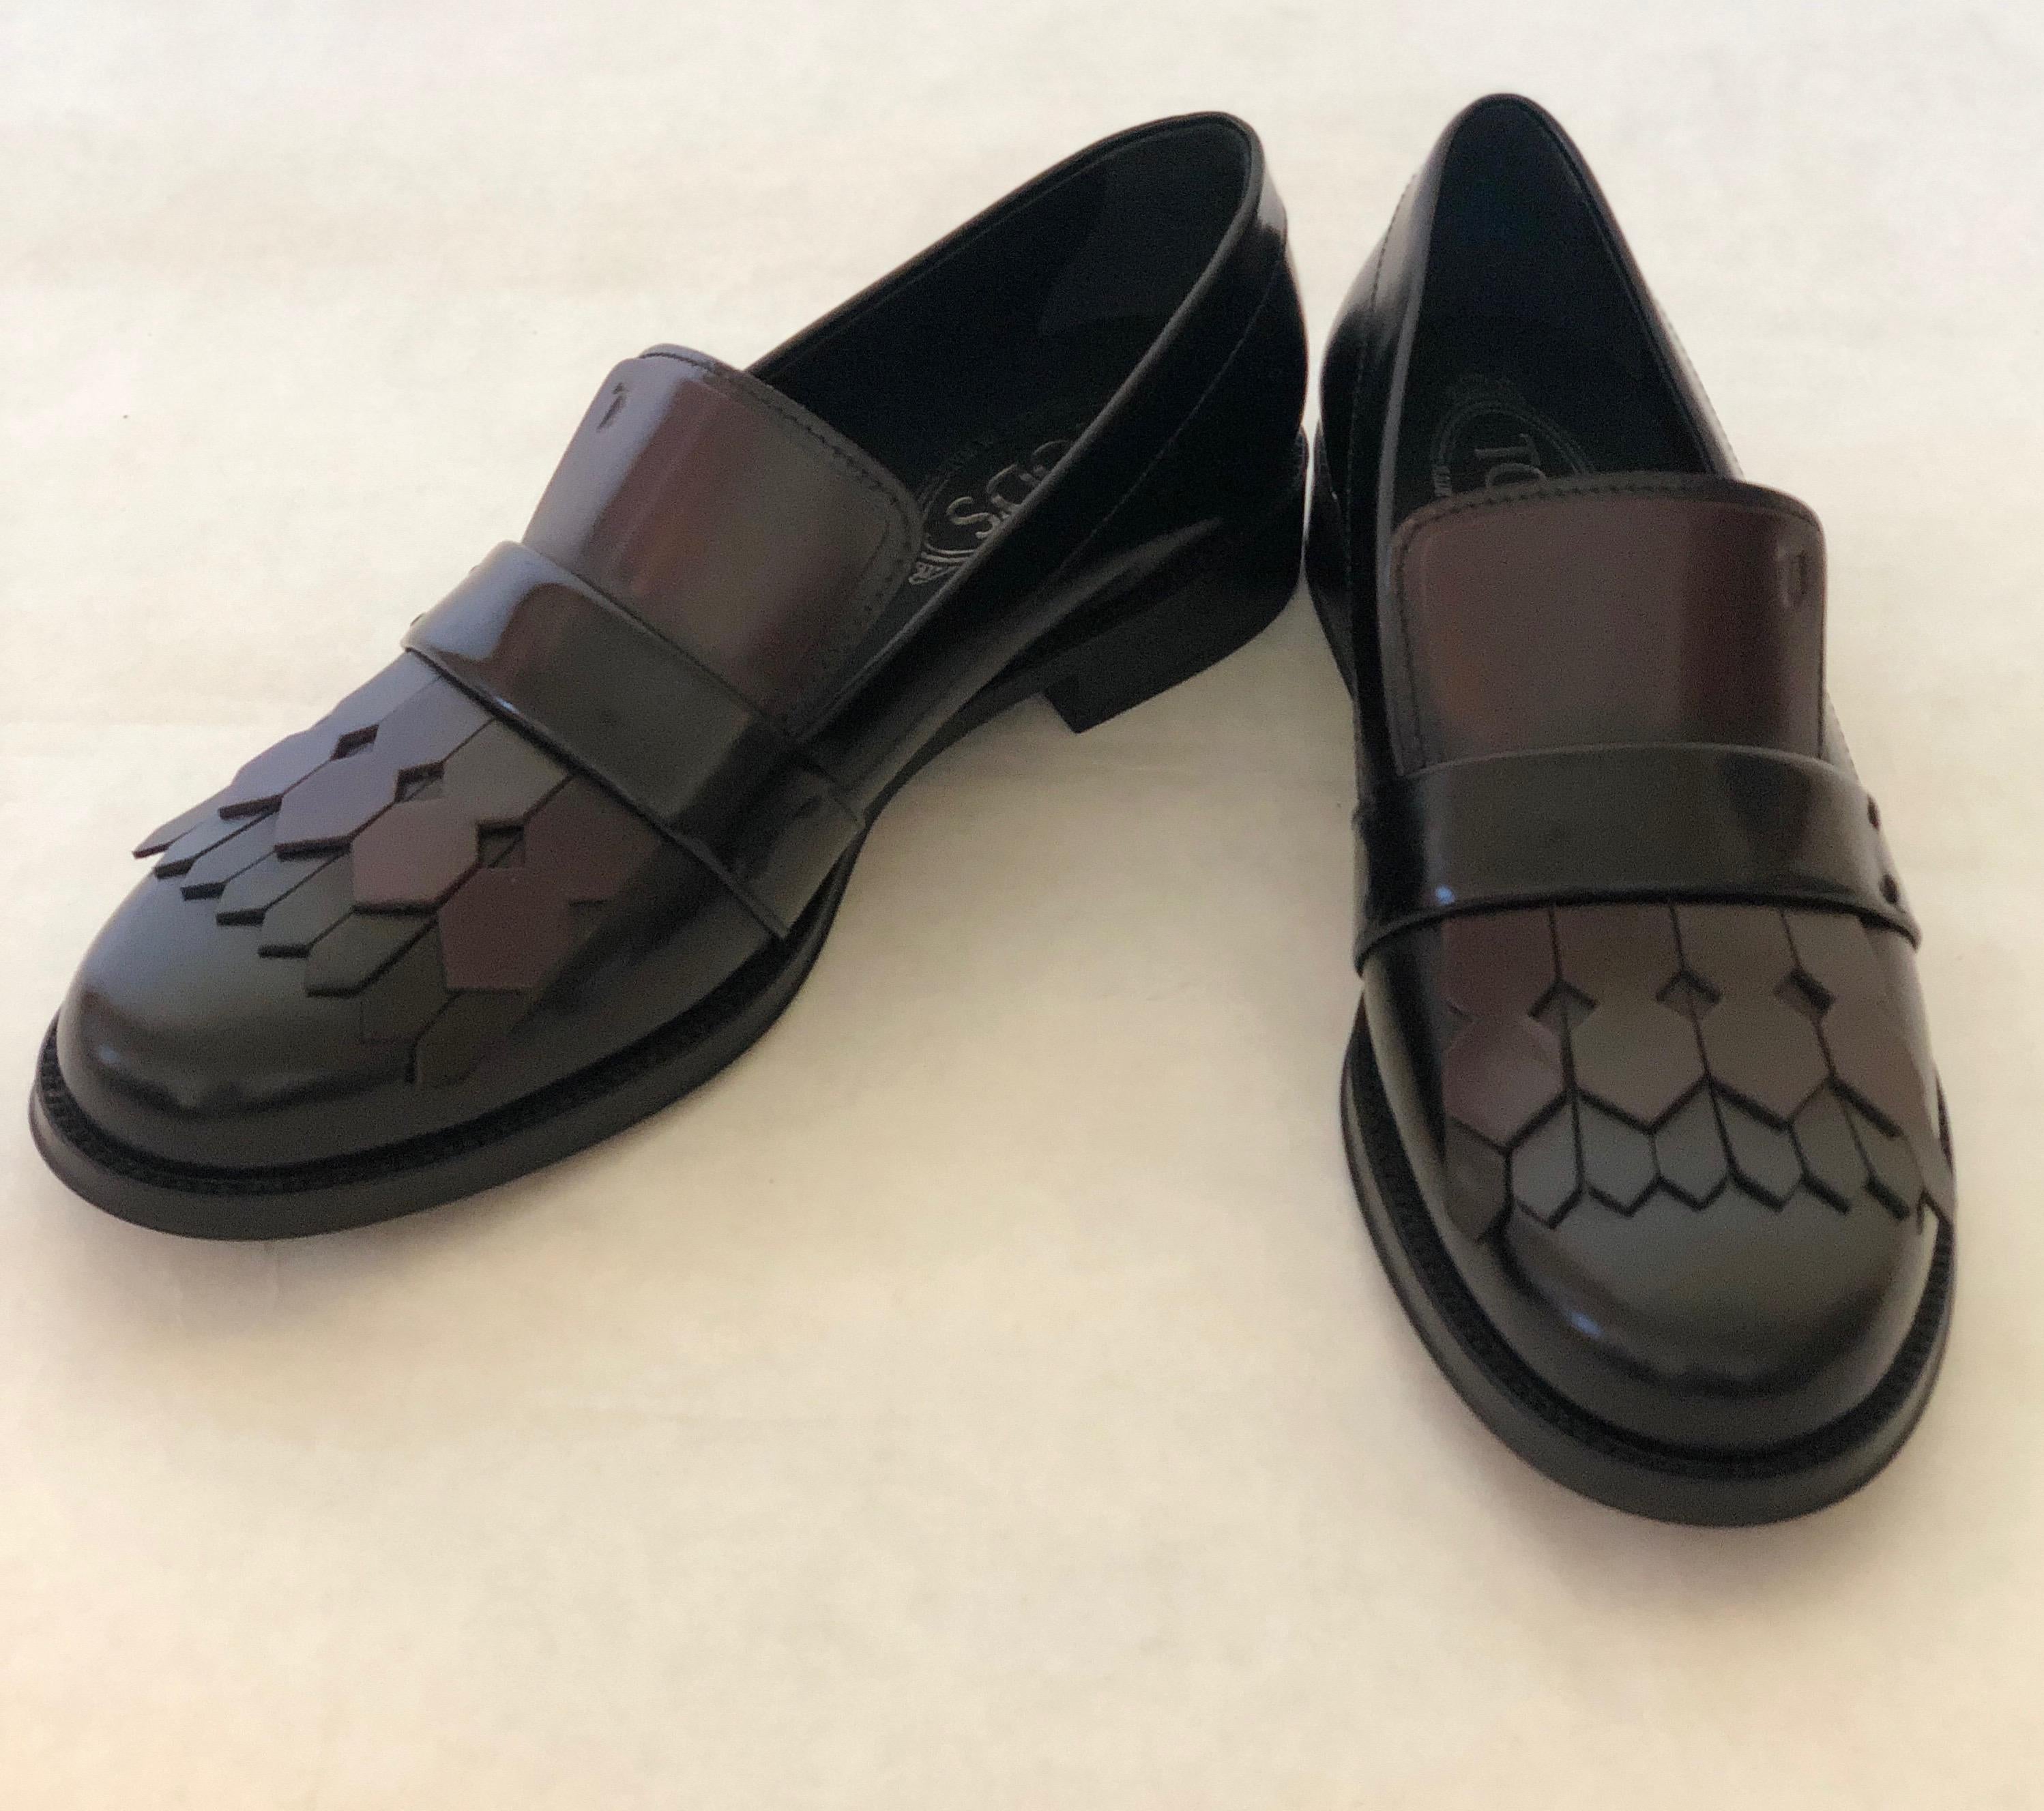 Make:  Tod's
Place of Manufacture:  Italy
Size:  39.5 EU
Materials:  Leather uppers and rubber sole (Tod's signature no skid sole)
Color:  Cordovan (burgundy) and black
Style:  Cordovan and black leather kiltie tassel flap loafers with Tod's